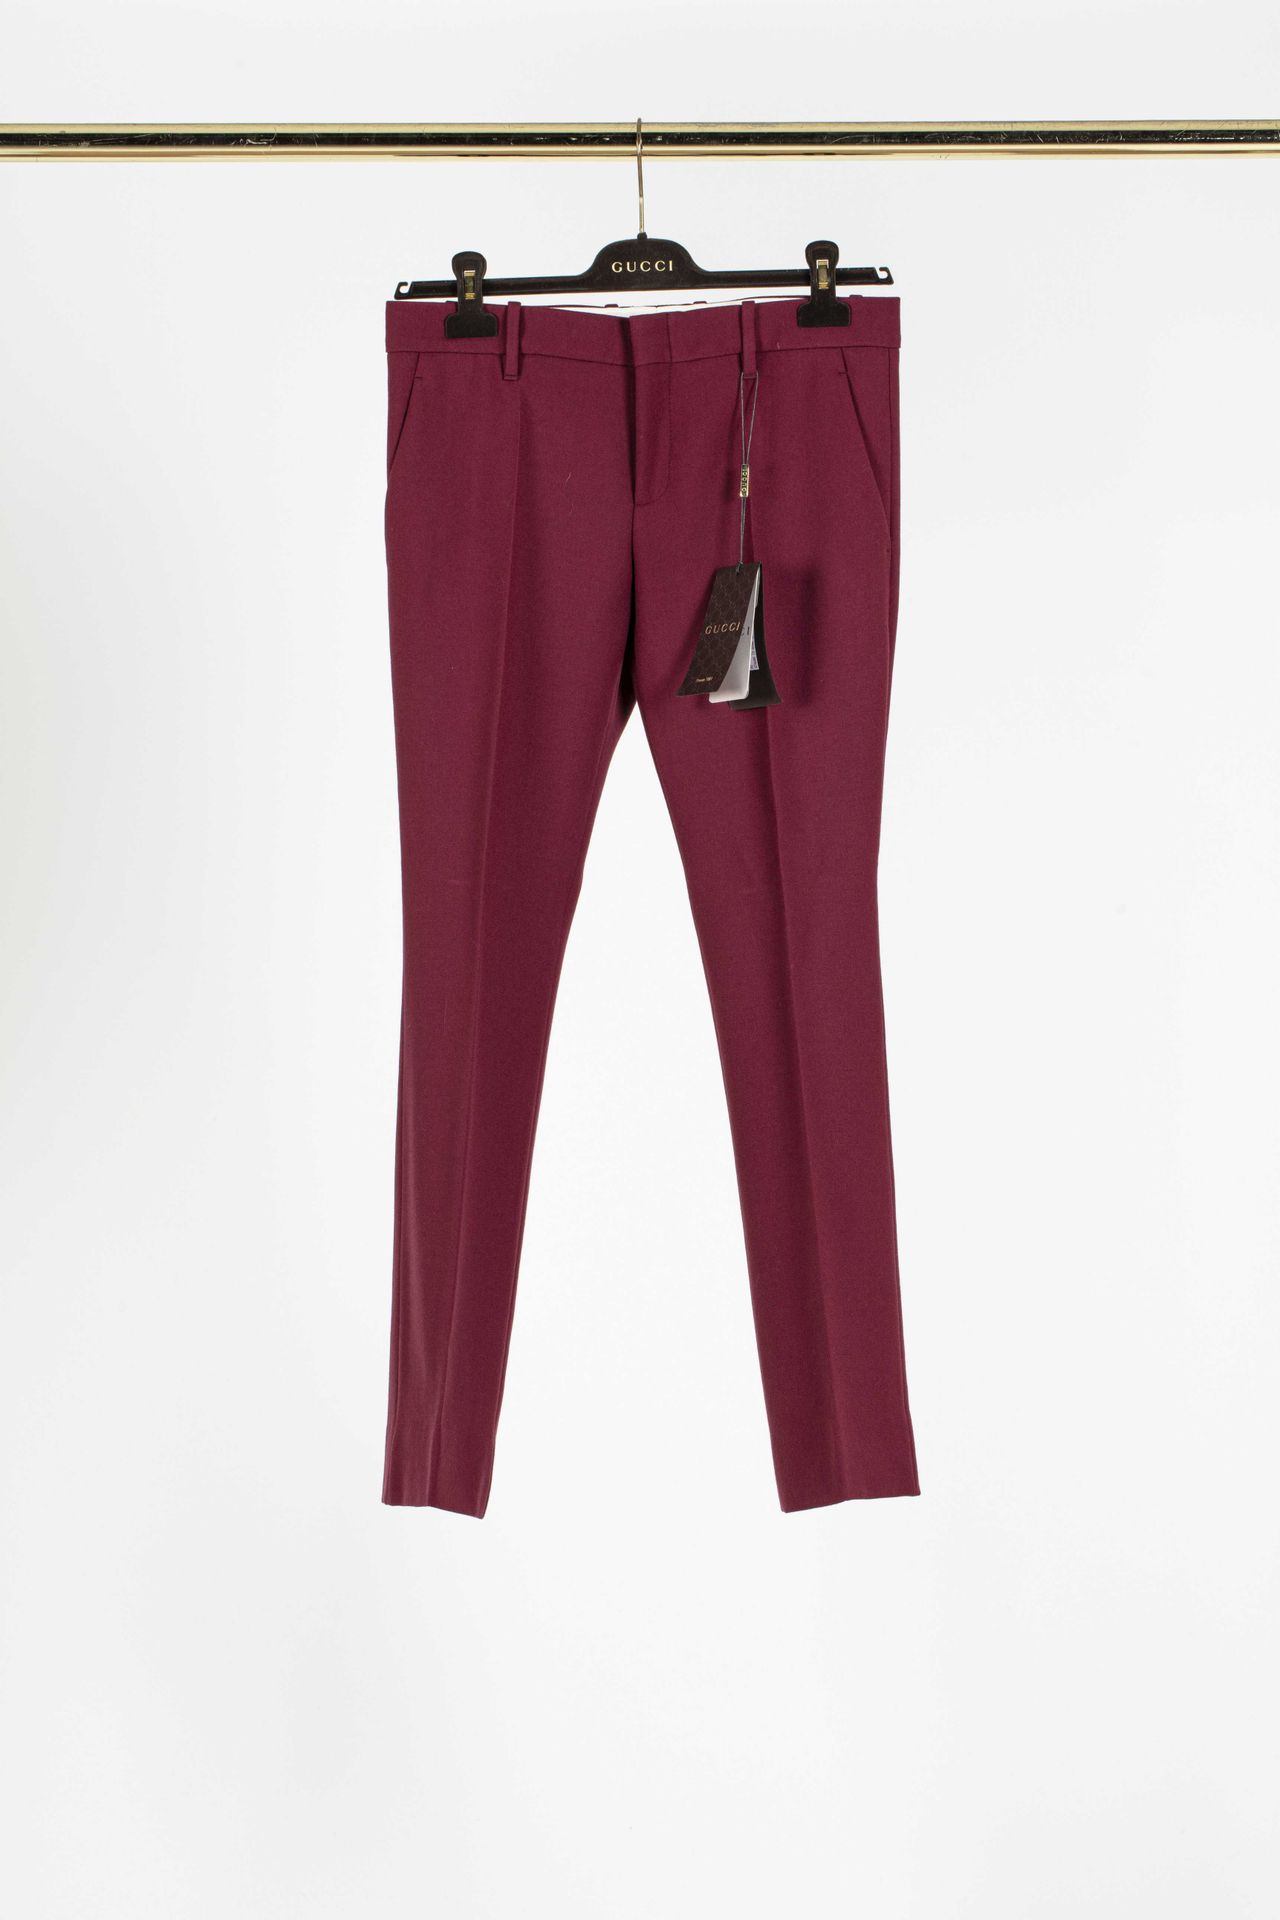 Null GUCCI: trouser suit in burgundy wool comprising straight trousers and a jac&hellip;